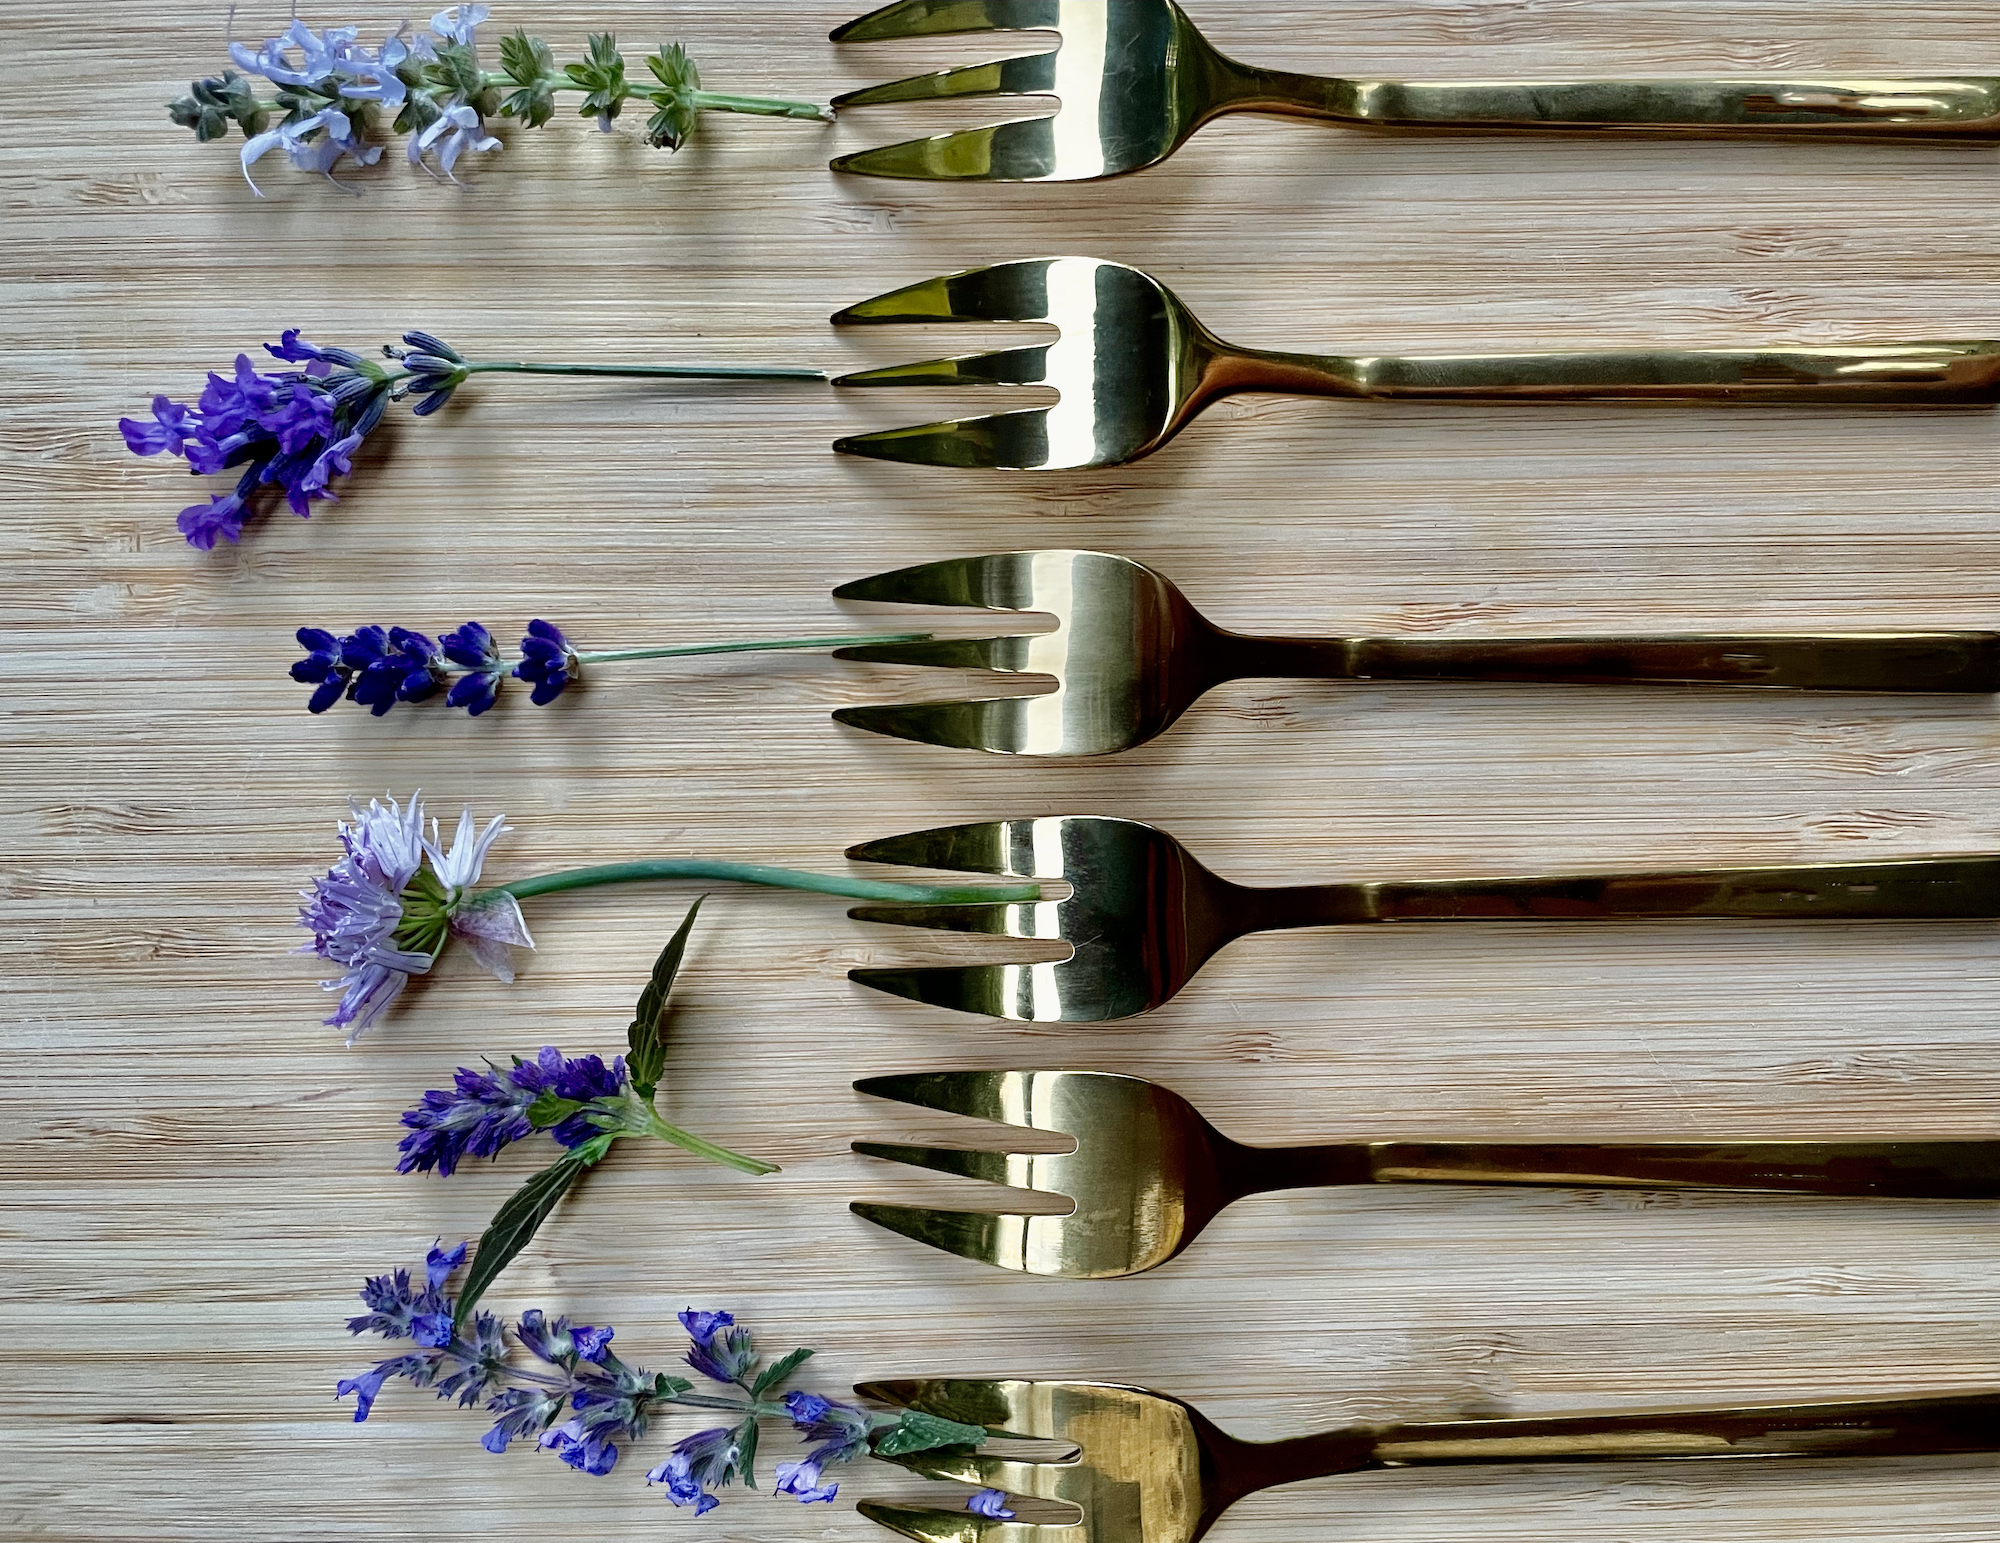 Gold forks with lavender and edible flowers